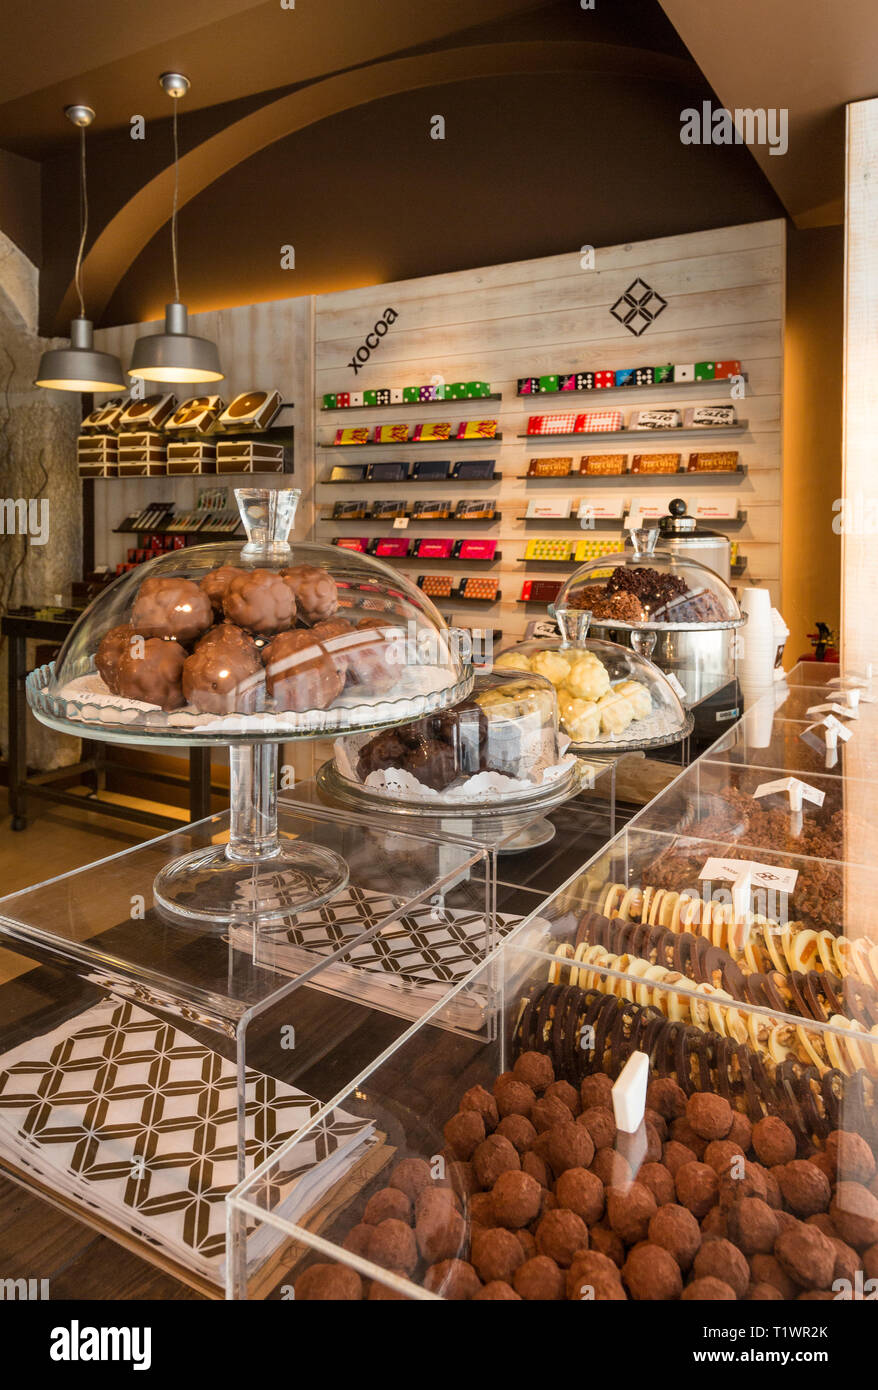 A gourmet chocolate shop in Lisbon, Portugal. Shopping for local specialty foods. Stock Photo